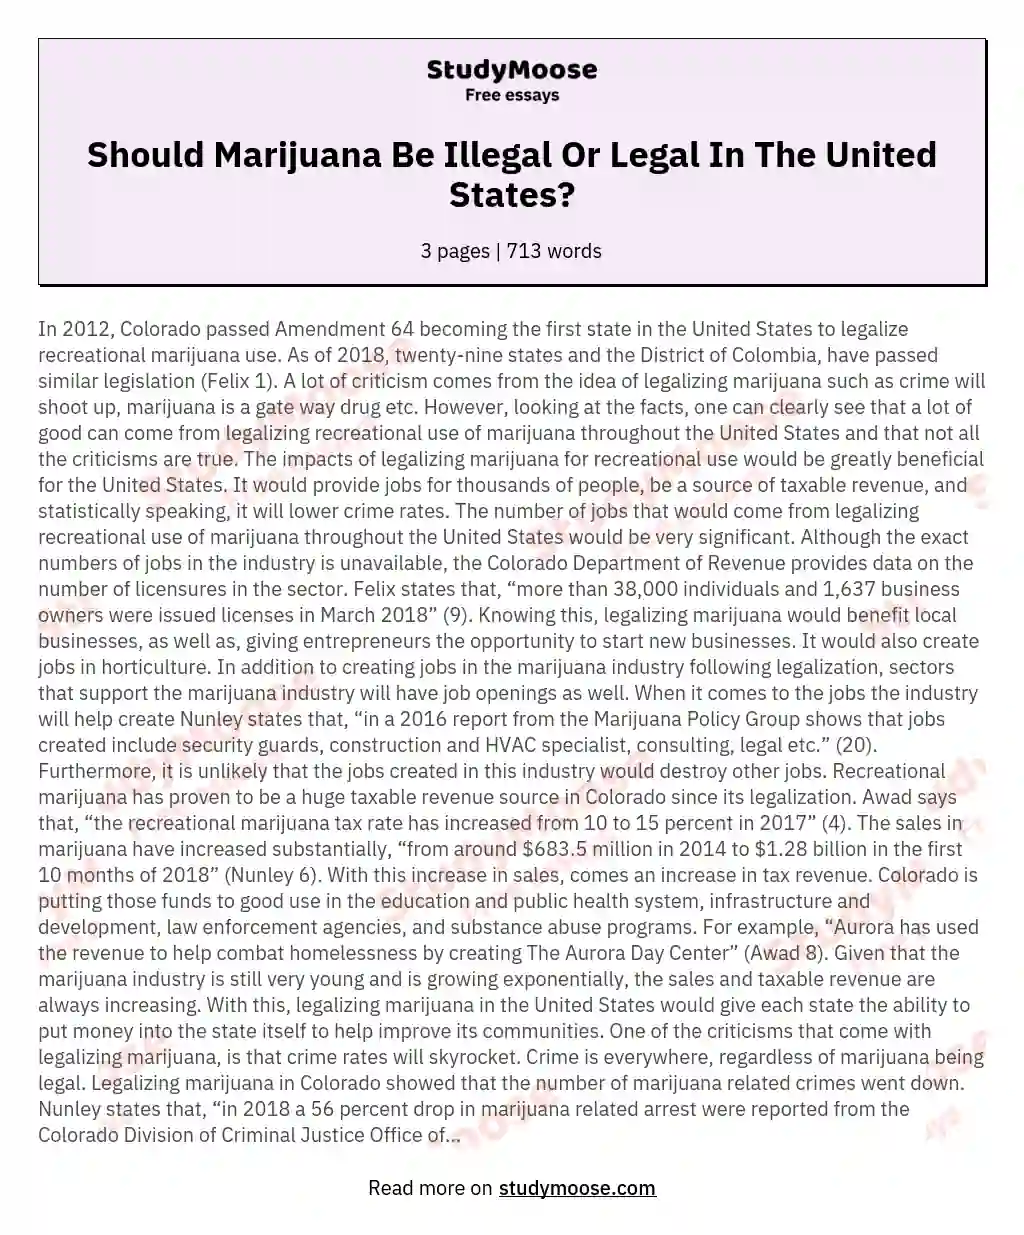 Should Marijuana Be Illegal Or Legal In The United States? essay